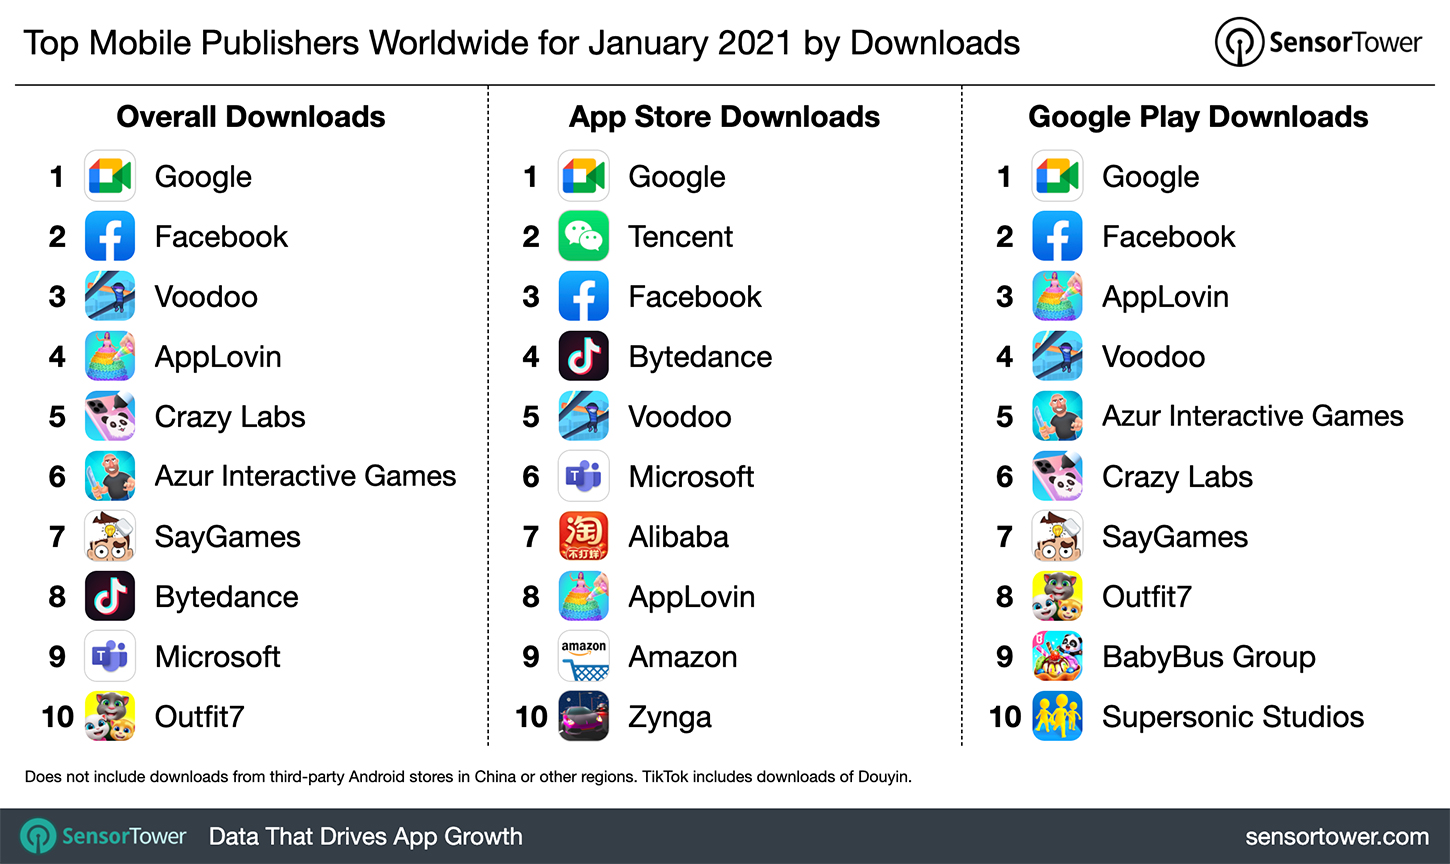 Top Mobile Publishers Worldwide for January 2021 by Downloads